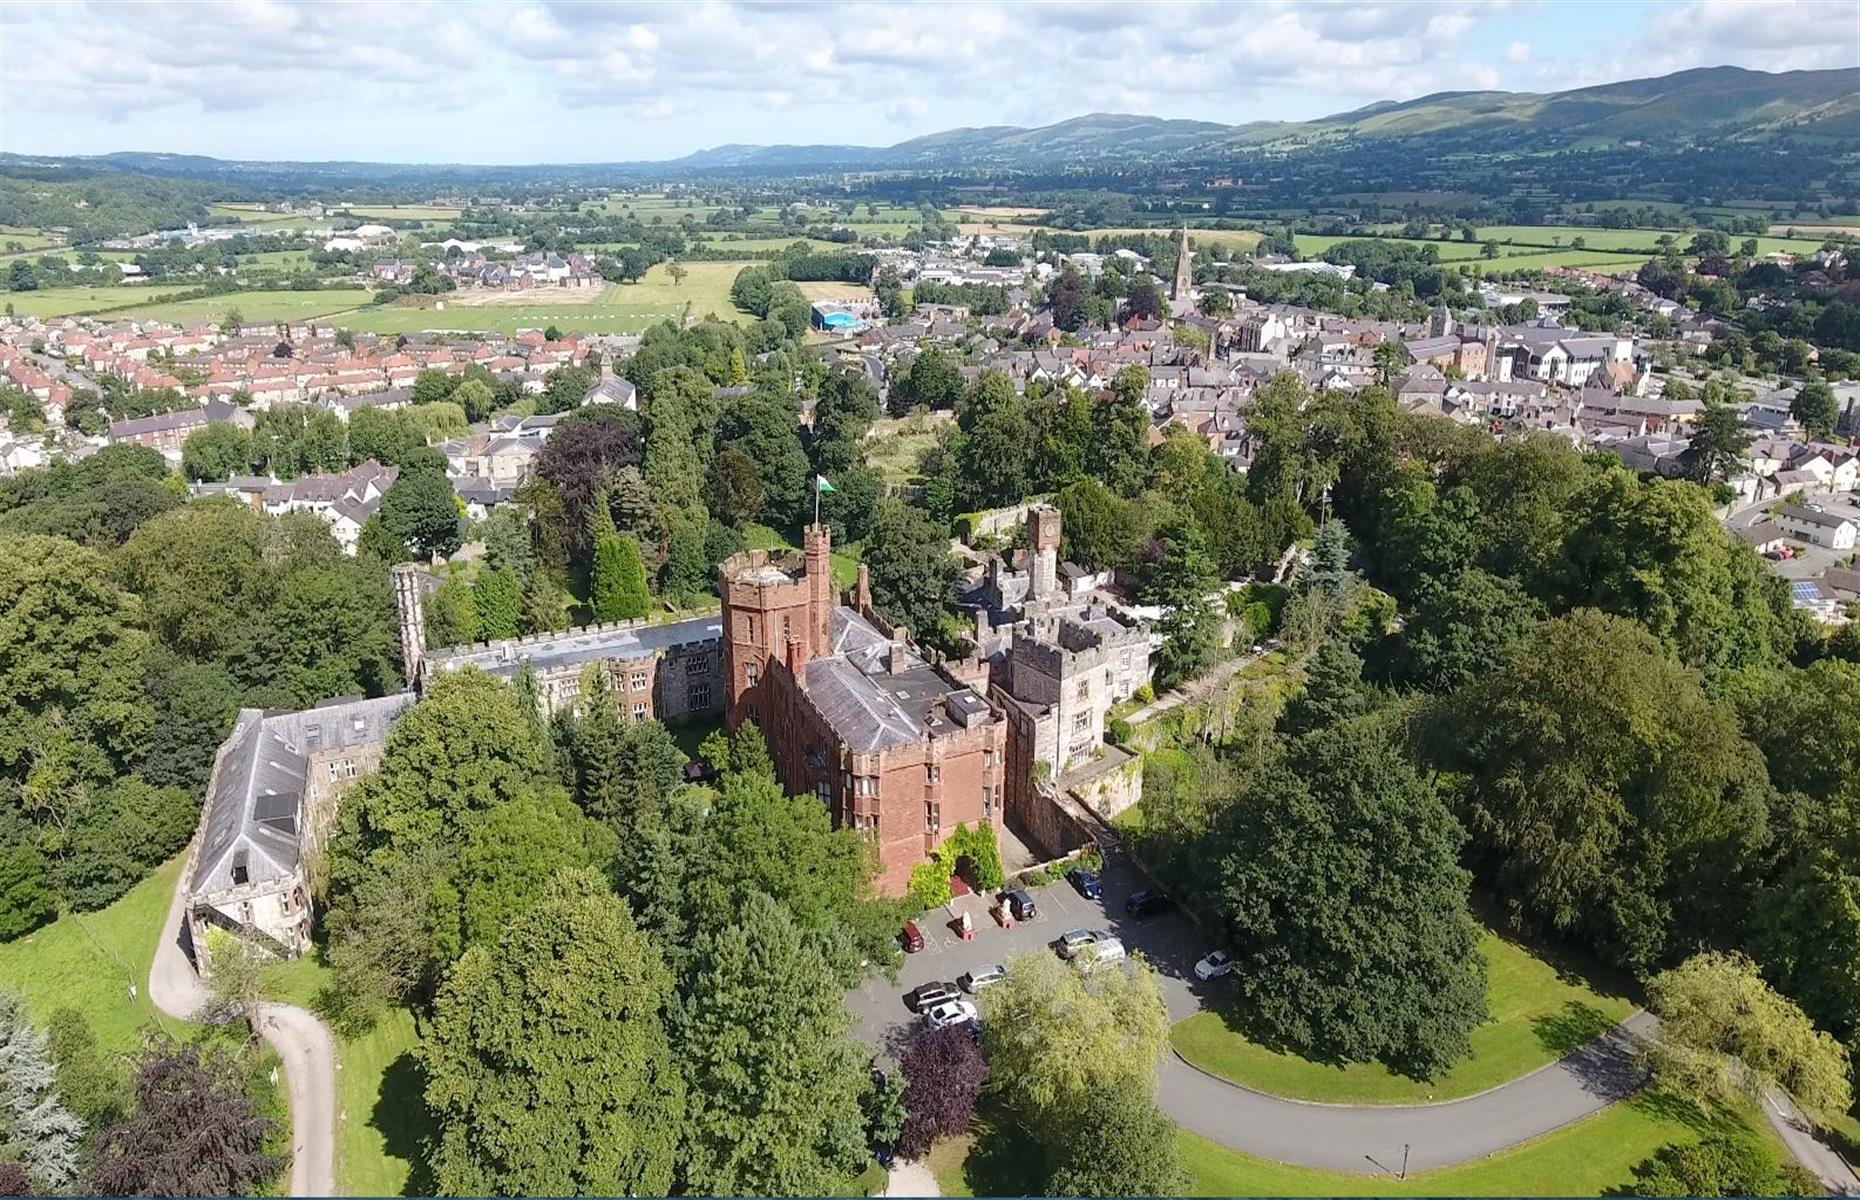 <p>Wales' <a href="https://www.ruthincastle.co.uk/">Ruthin Castle</a> – which has its roots right back in the 1200s – has passed through the hands of many kings over the centuries (including King Henry VIII). Today the plush hotel is still fit for royalty, with upscale restaurants and a spa that apparently welcomes guests both living and dead. They include Lady Grey, a phantom who purportedly wanders the castle halls and battlements, having been executed for murdering her husband's mistress.</p>